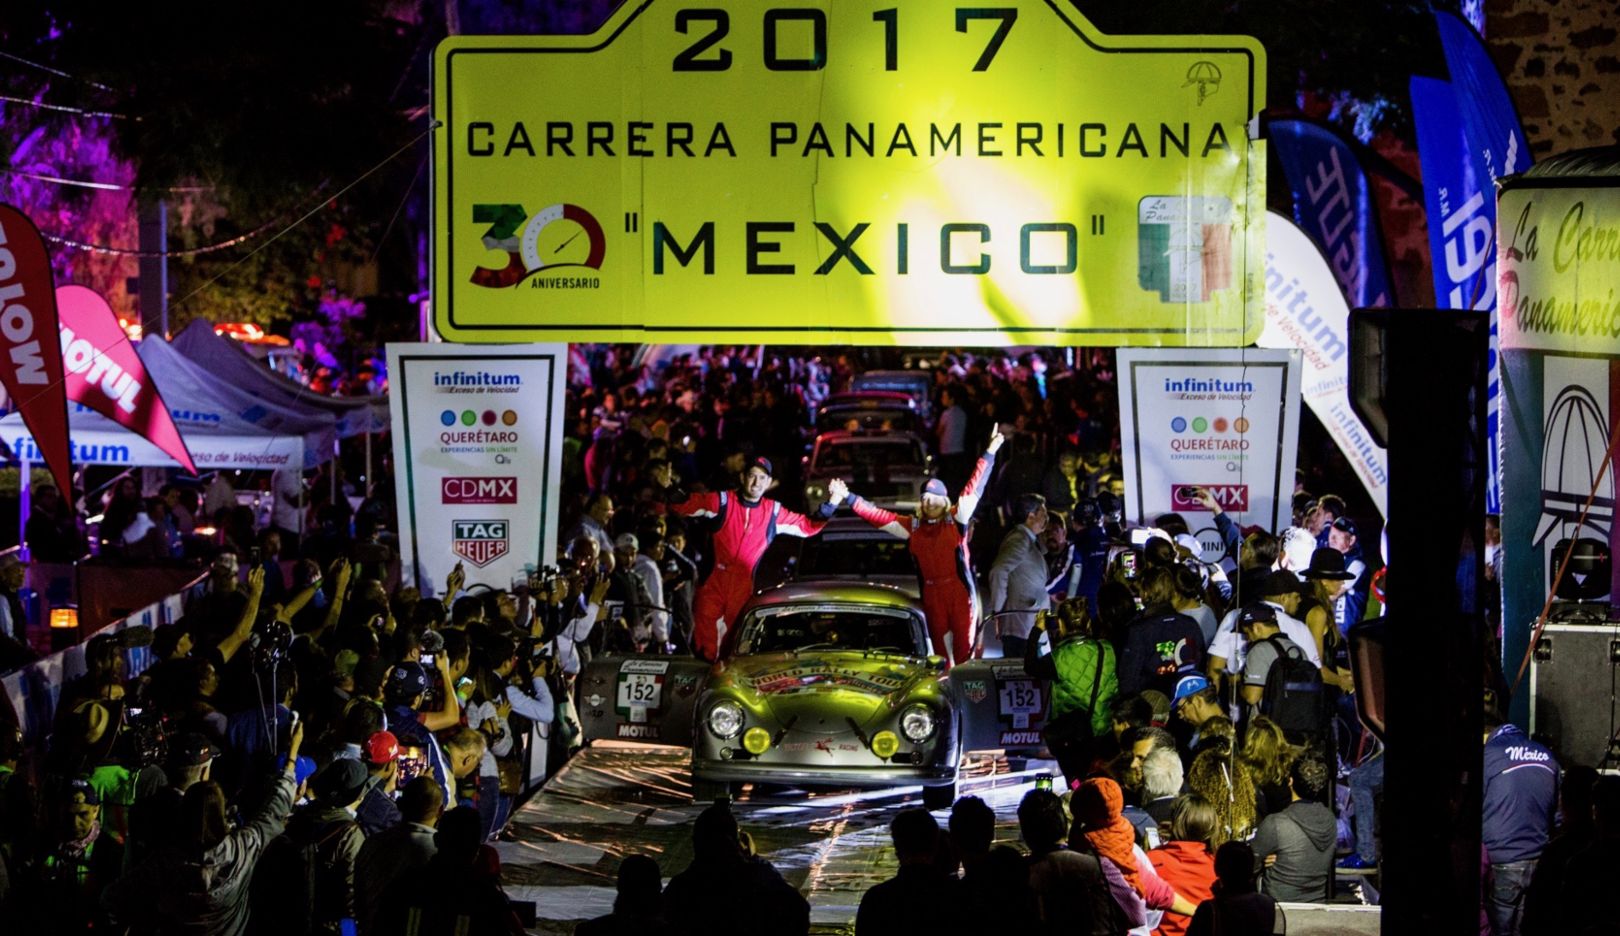 For Renée Brinkerhoff (right on the winner’s ramp), the adventure of the Valkyrie Racing 356 World Rally Tour began with the Carrera Panamericana in 2017. Together with navigator Roberto Mendoza, she celebrated a “first in class” win in the long-distance race.